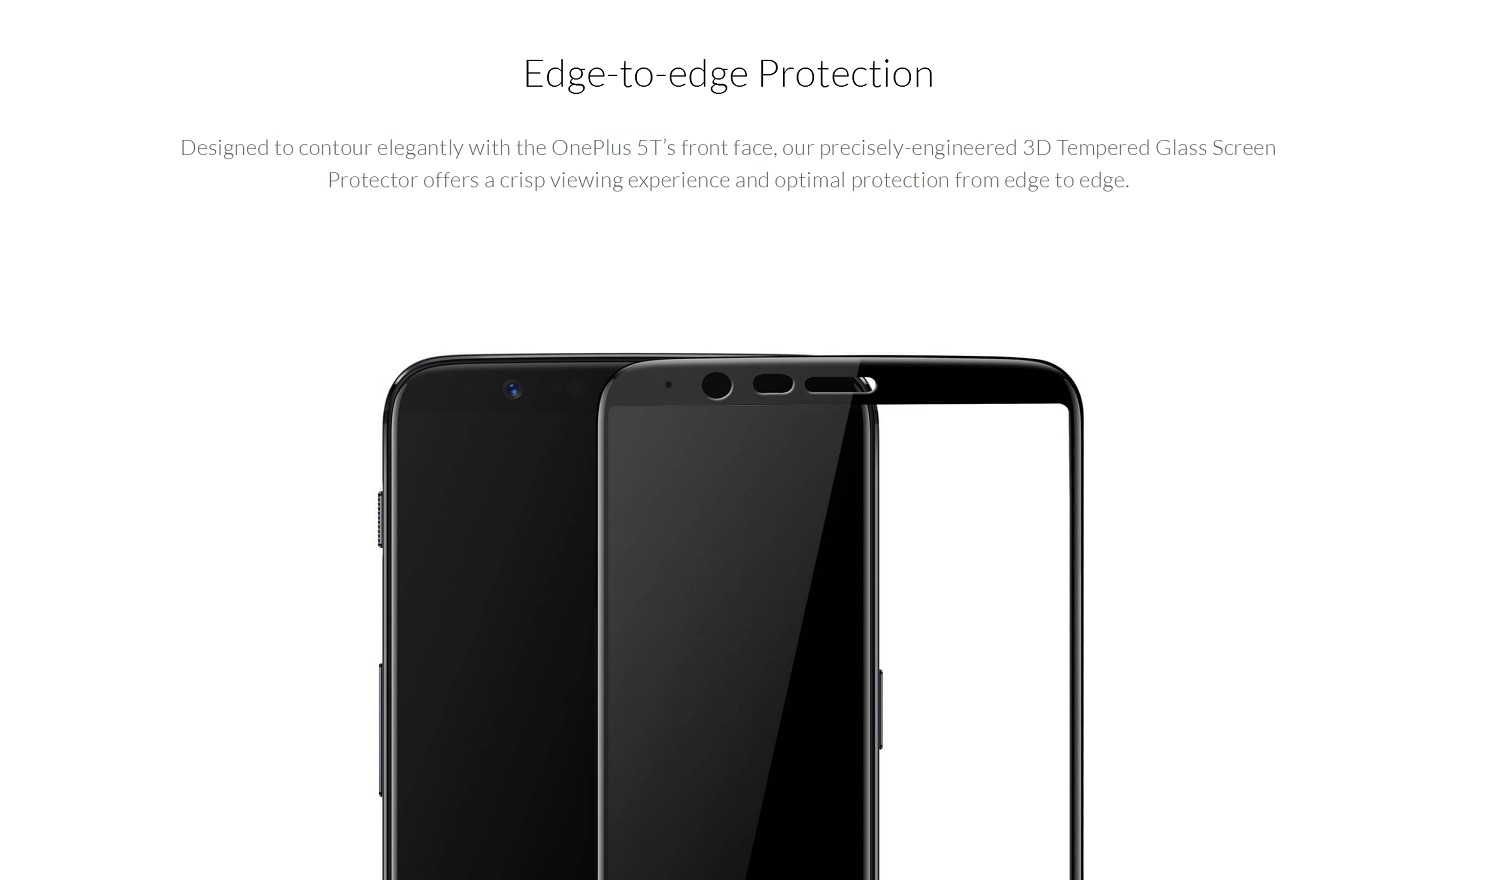 Oneplus 5 3d tempered glass screen protector black amazon